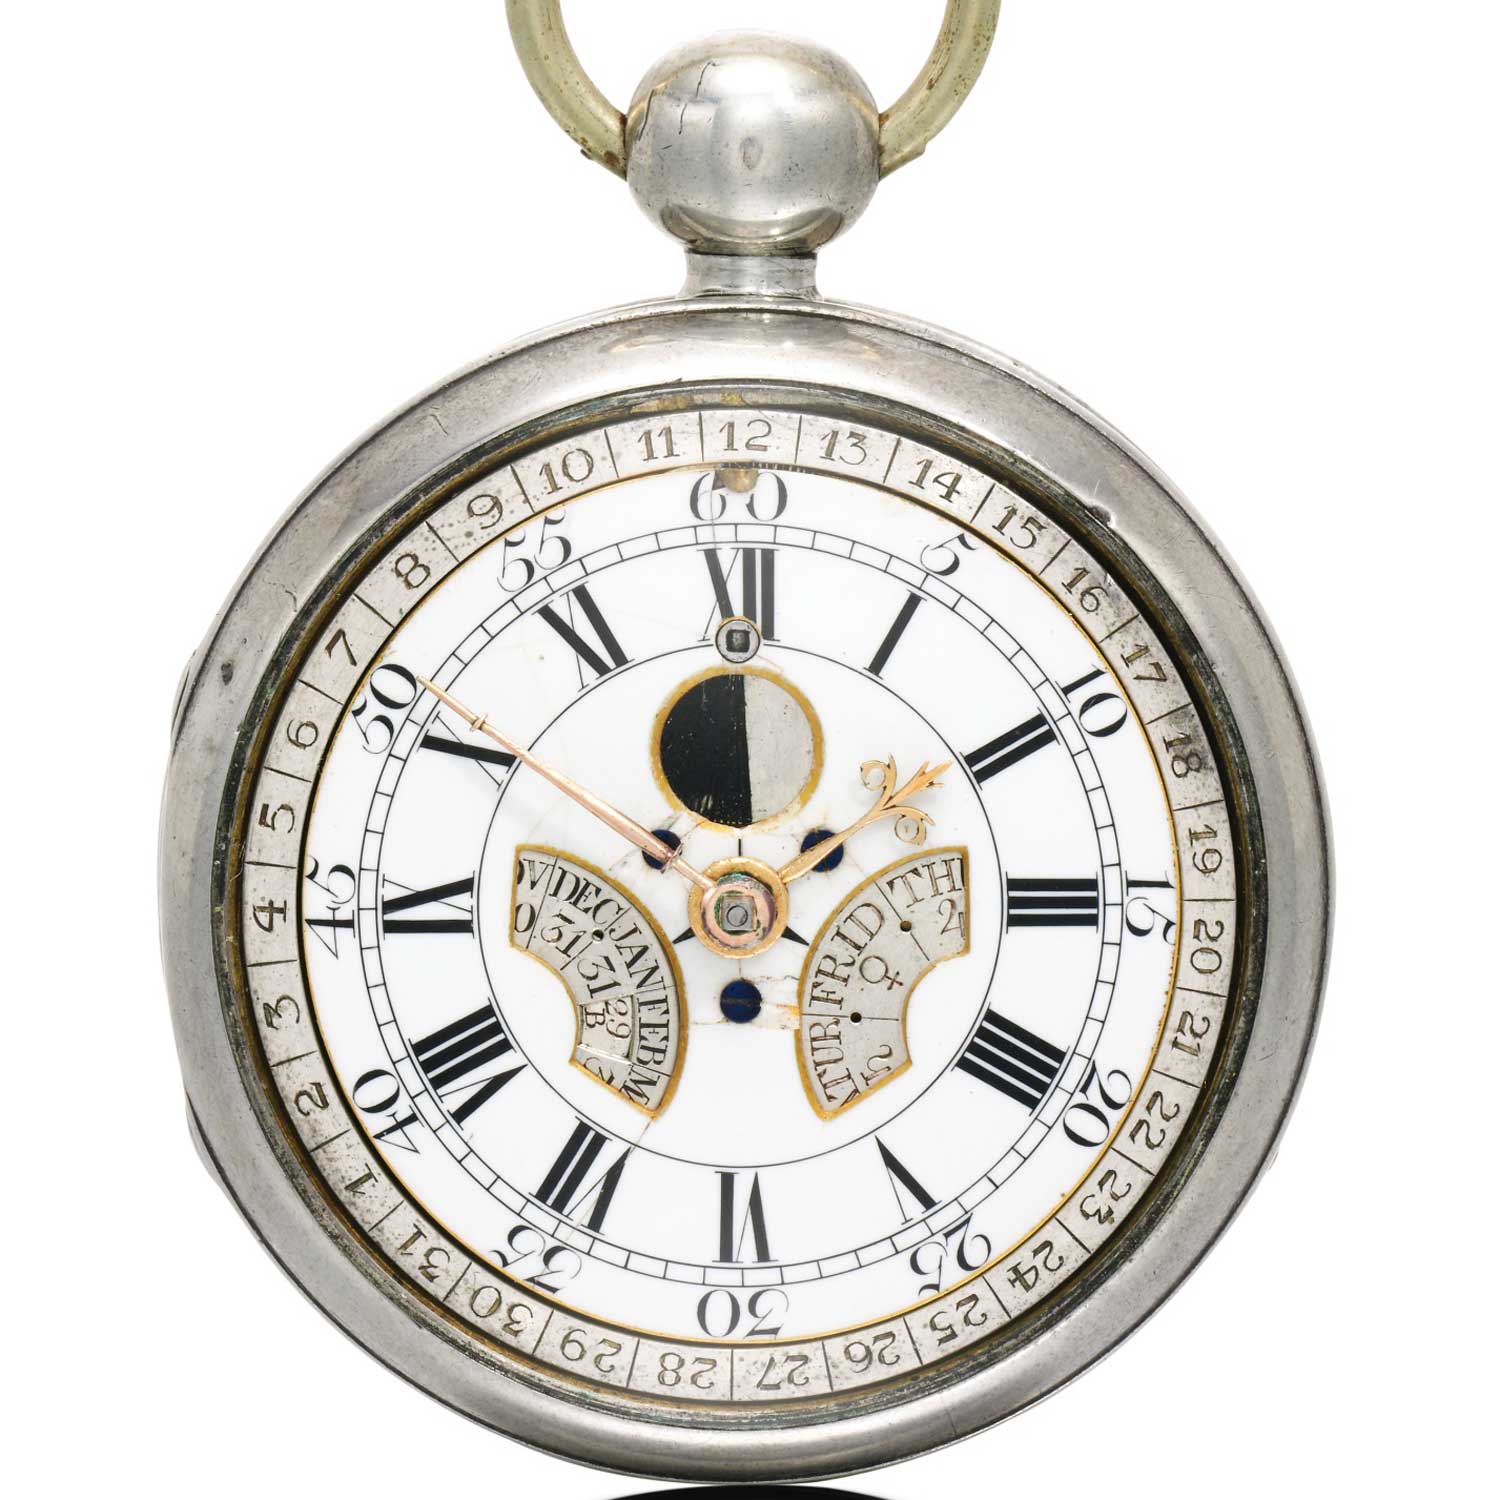 Earliest known perpetual calendar watch, created by Thomas Mudge in 1762. Image: Sotheby’s